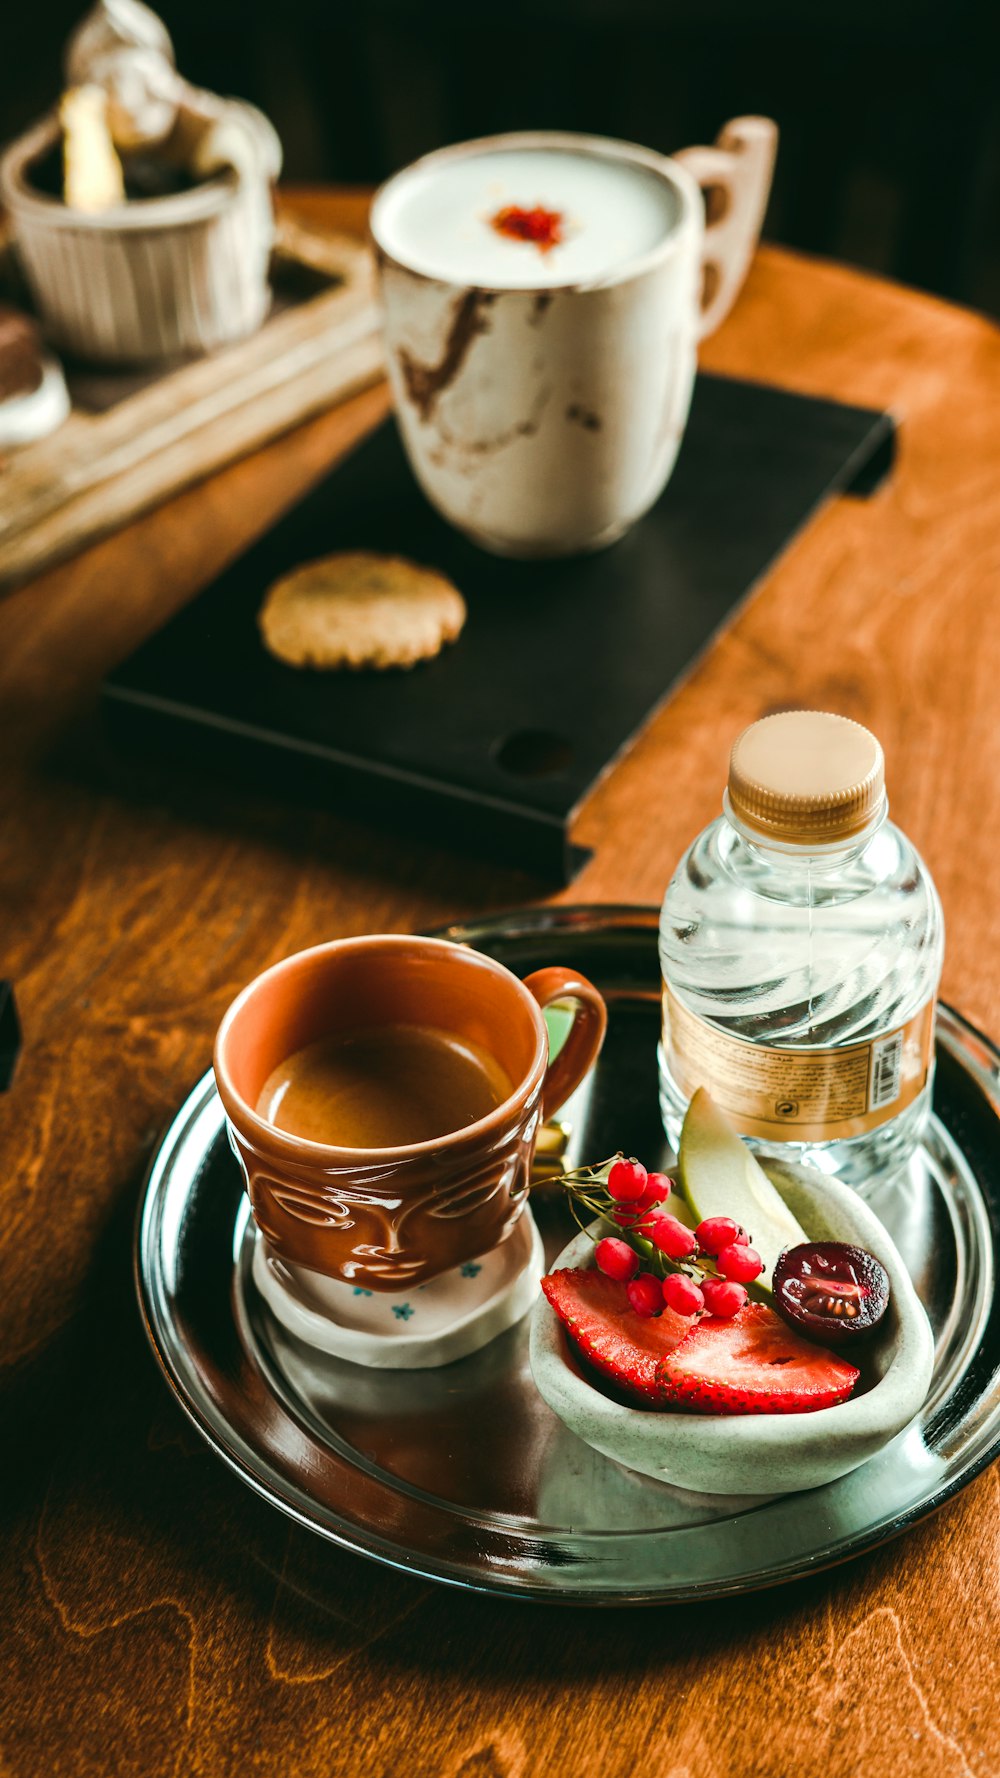 a wooden table topped with a plate of food and a cup of tea